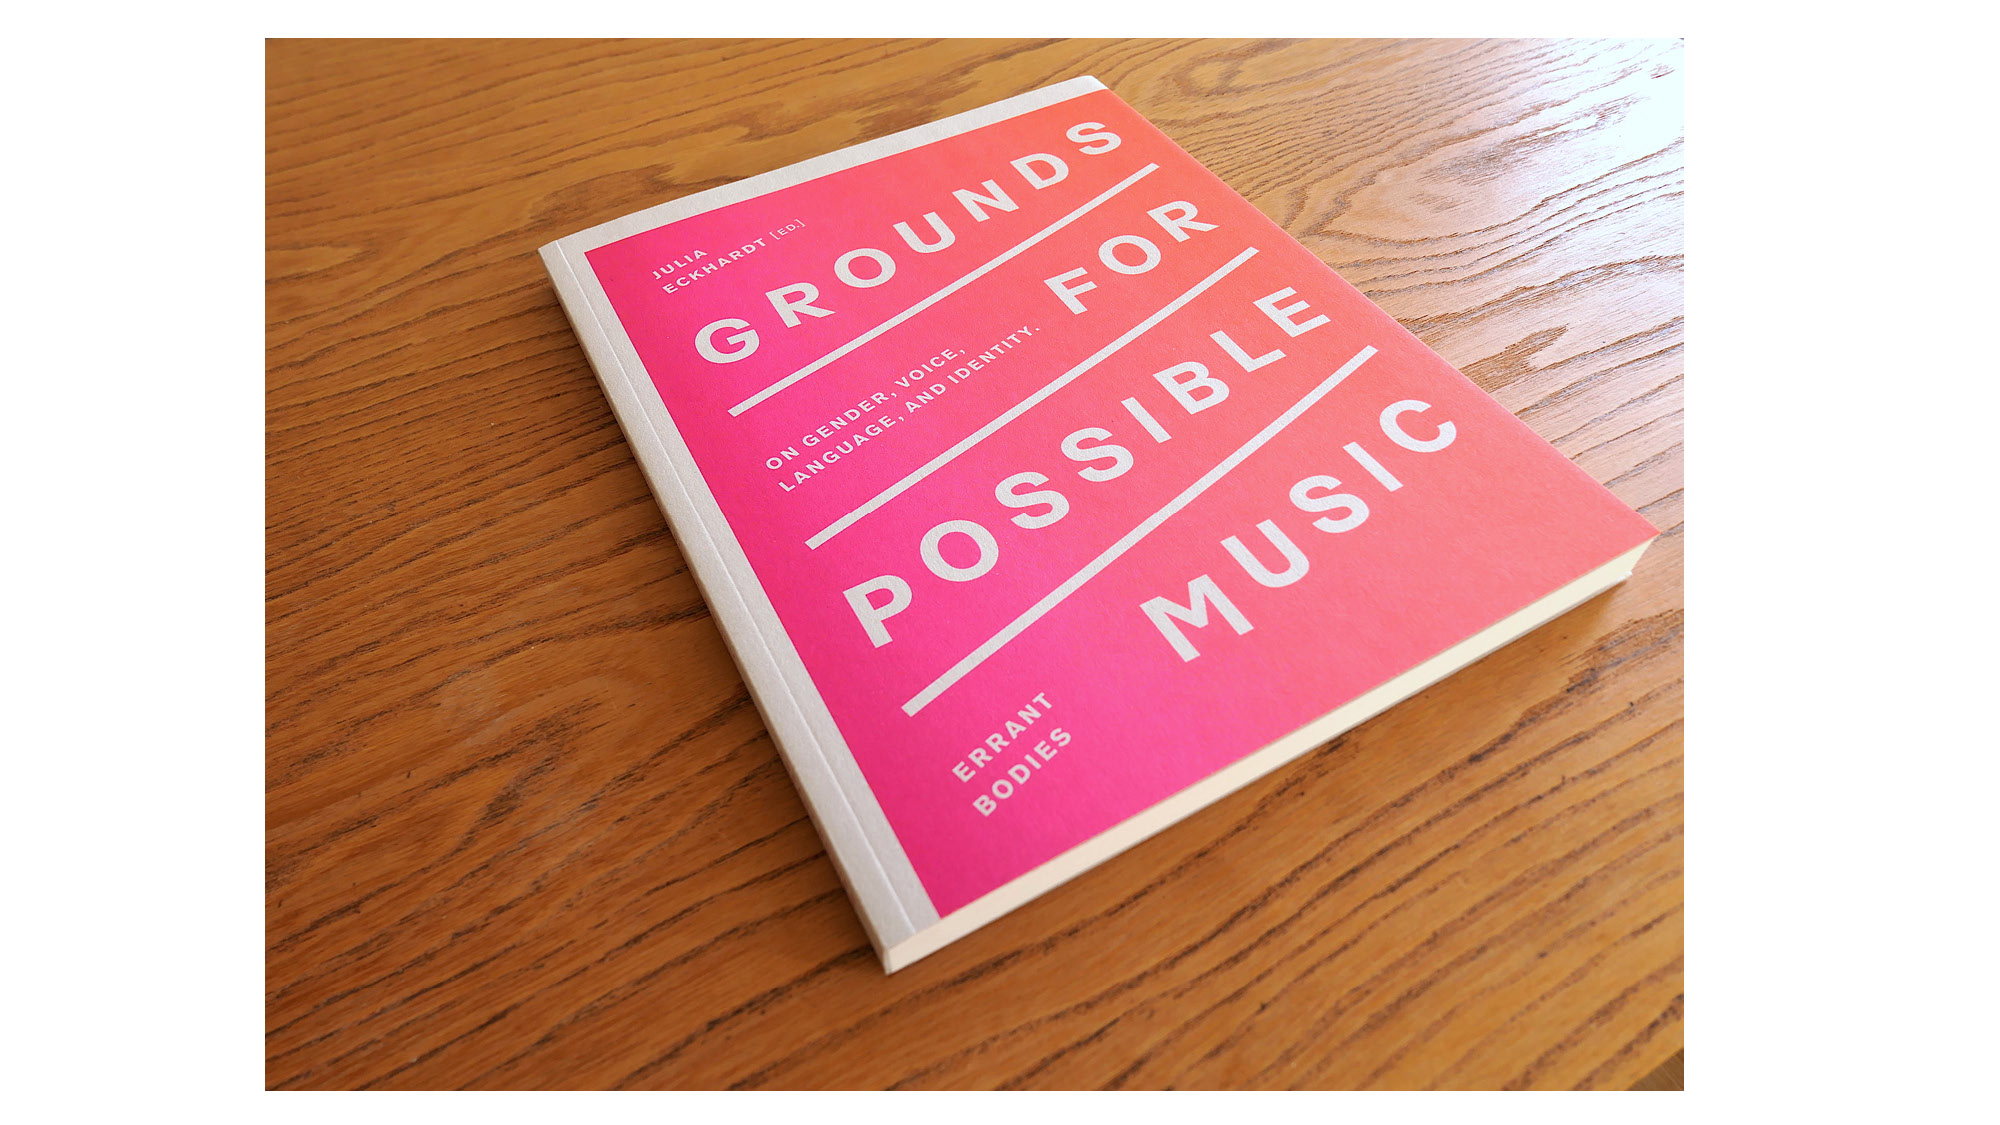 grounds-possible-music-2